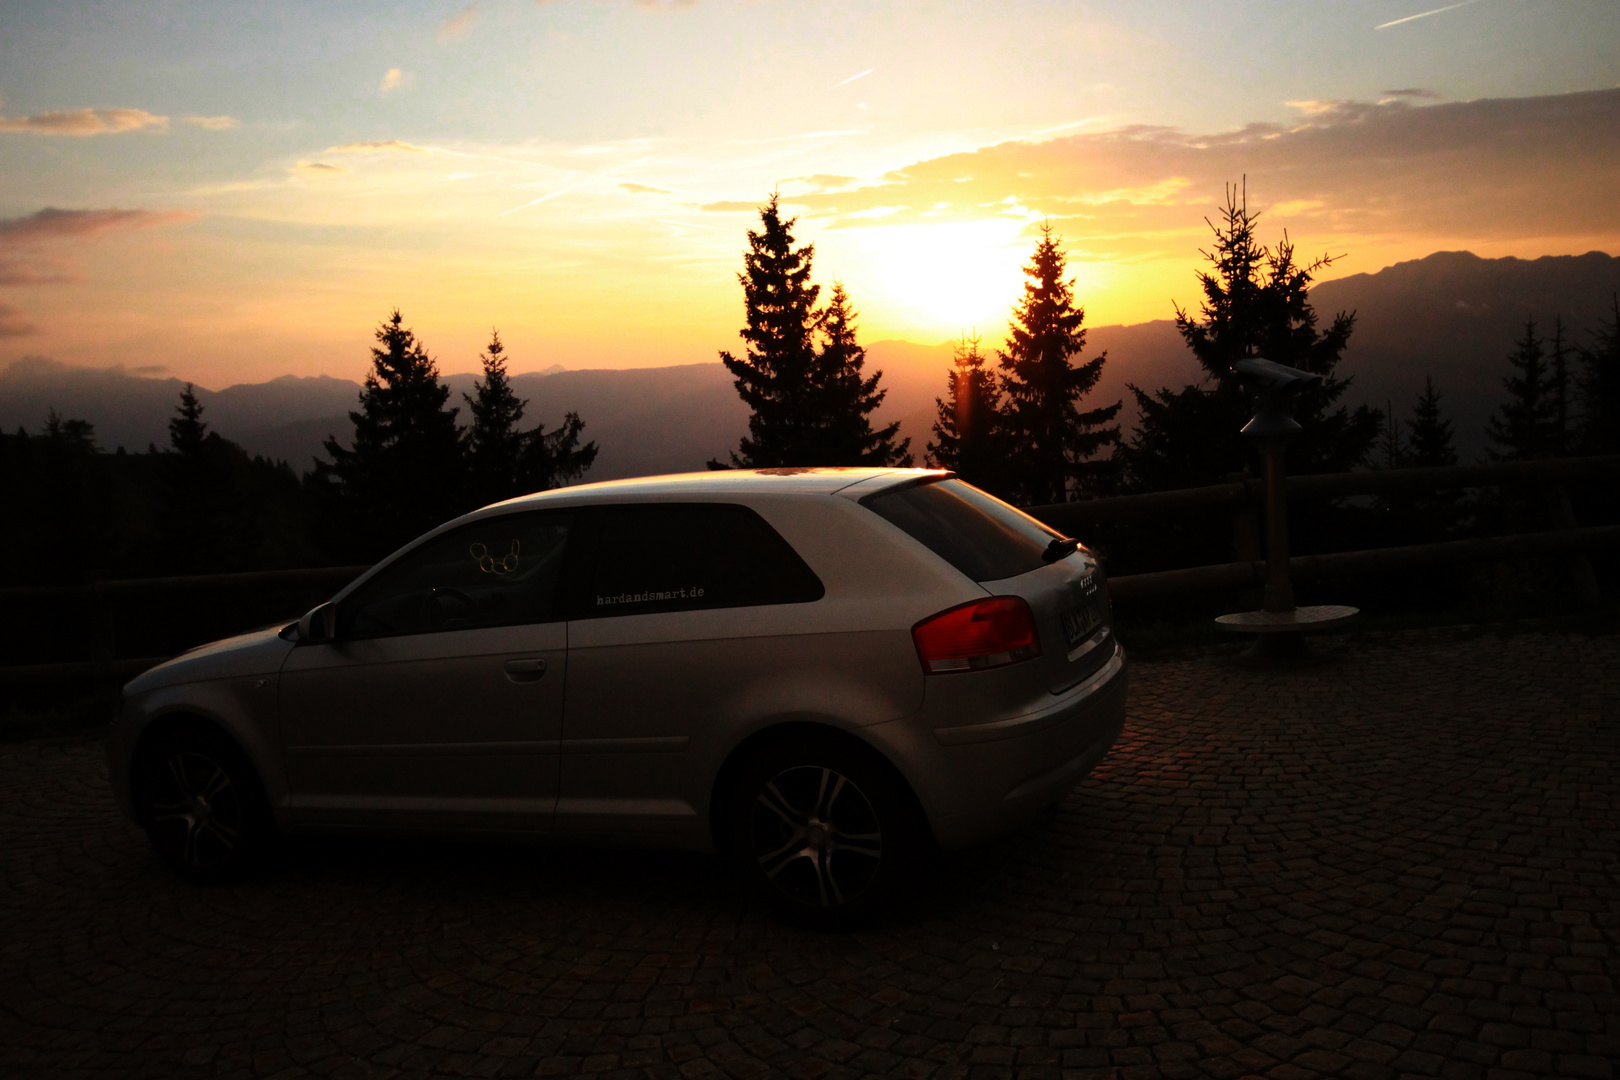 My A3 goes high over the mountains